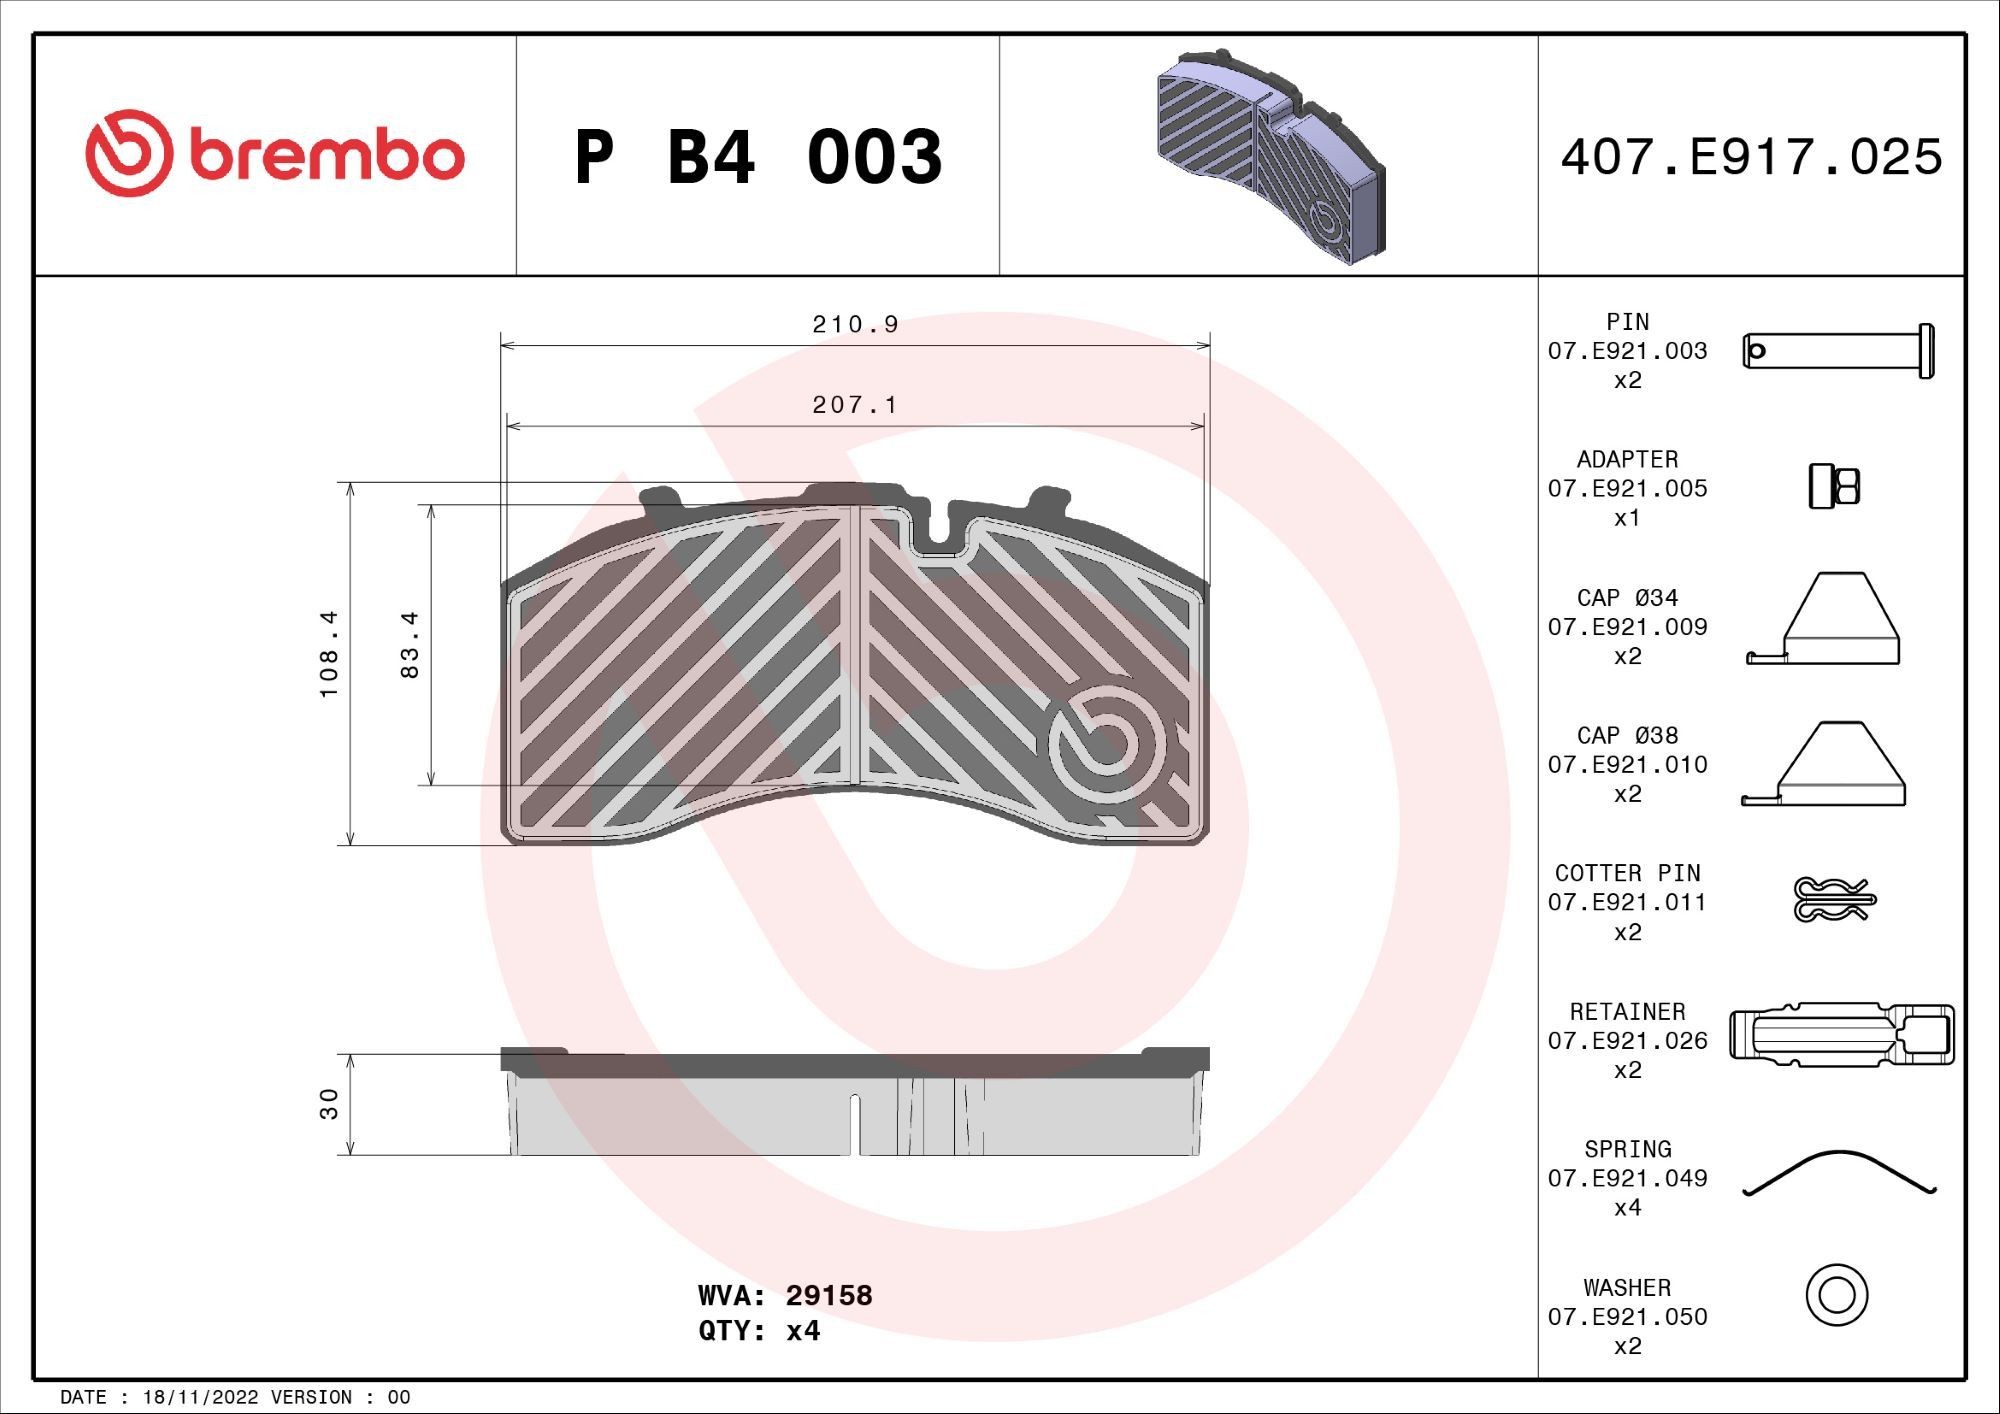 BREMBO prepared for wear indicator, with accessories Height: 108mm, Width: 211mm, Thickness: 30mm Brake pads P B4 003 buy